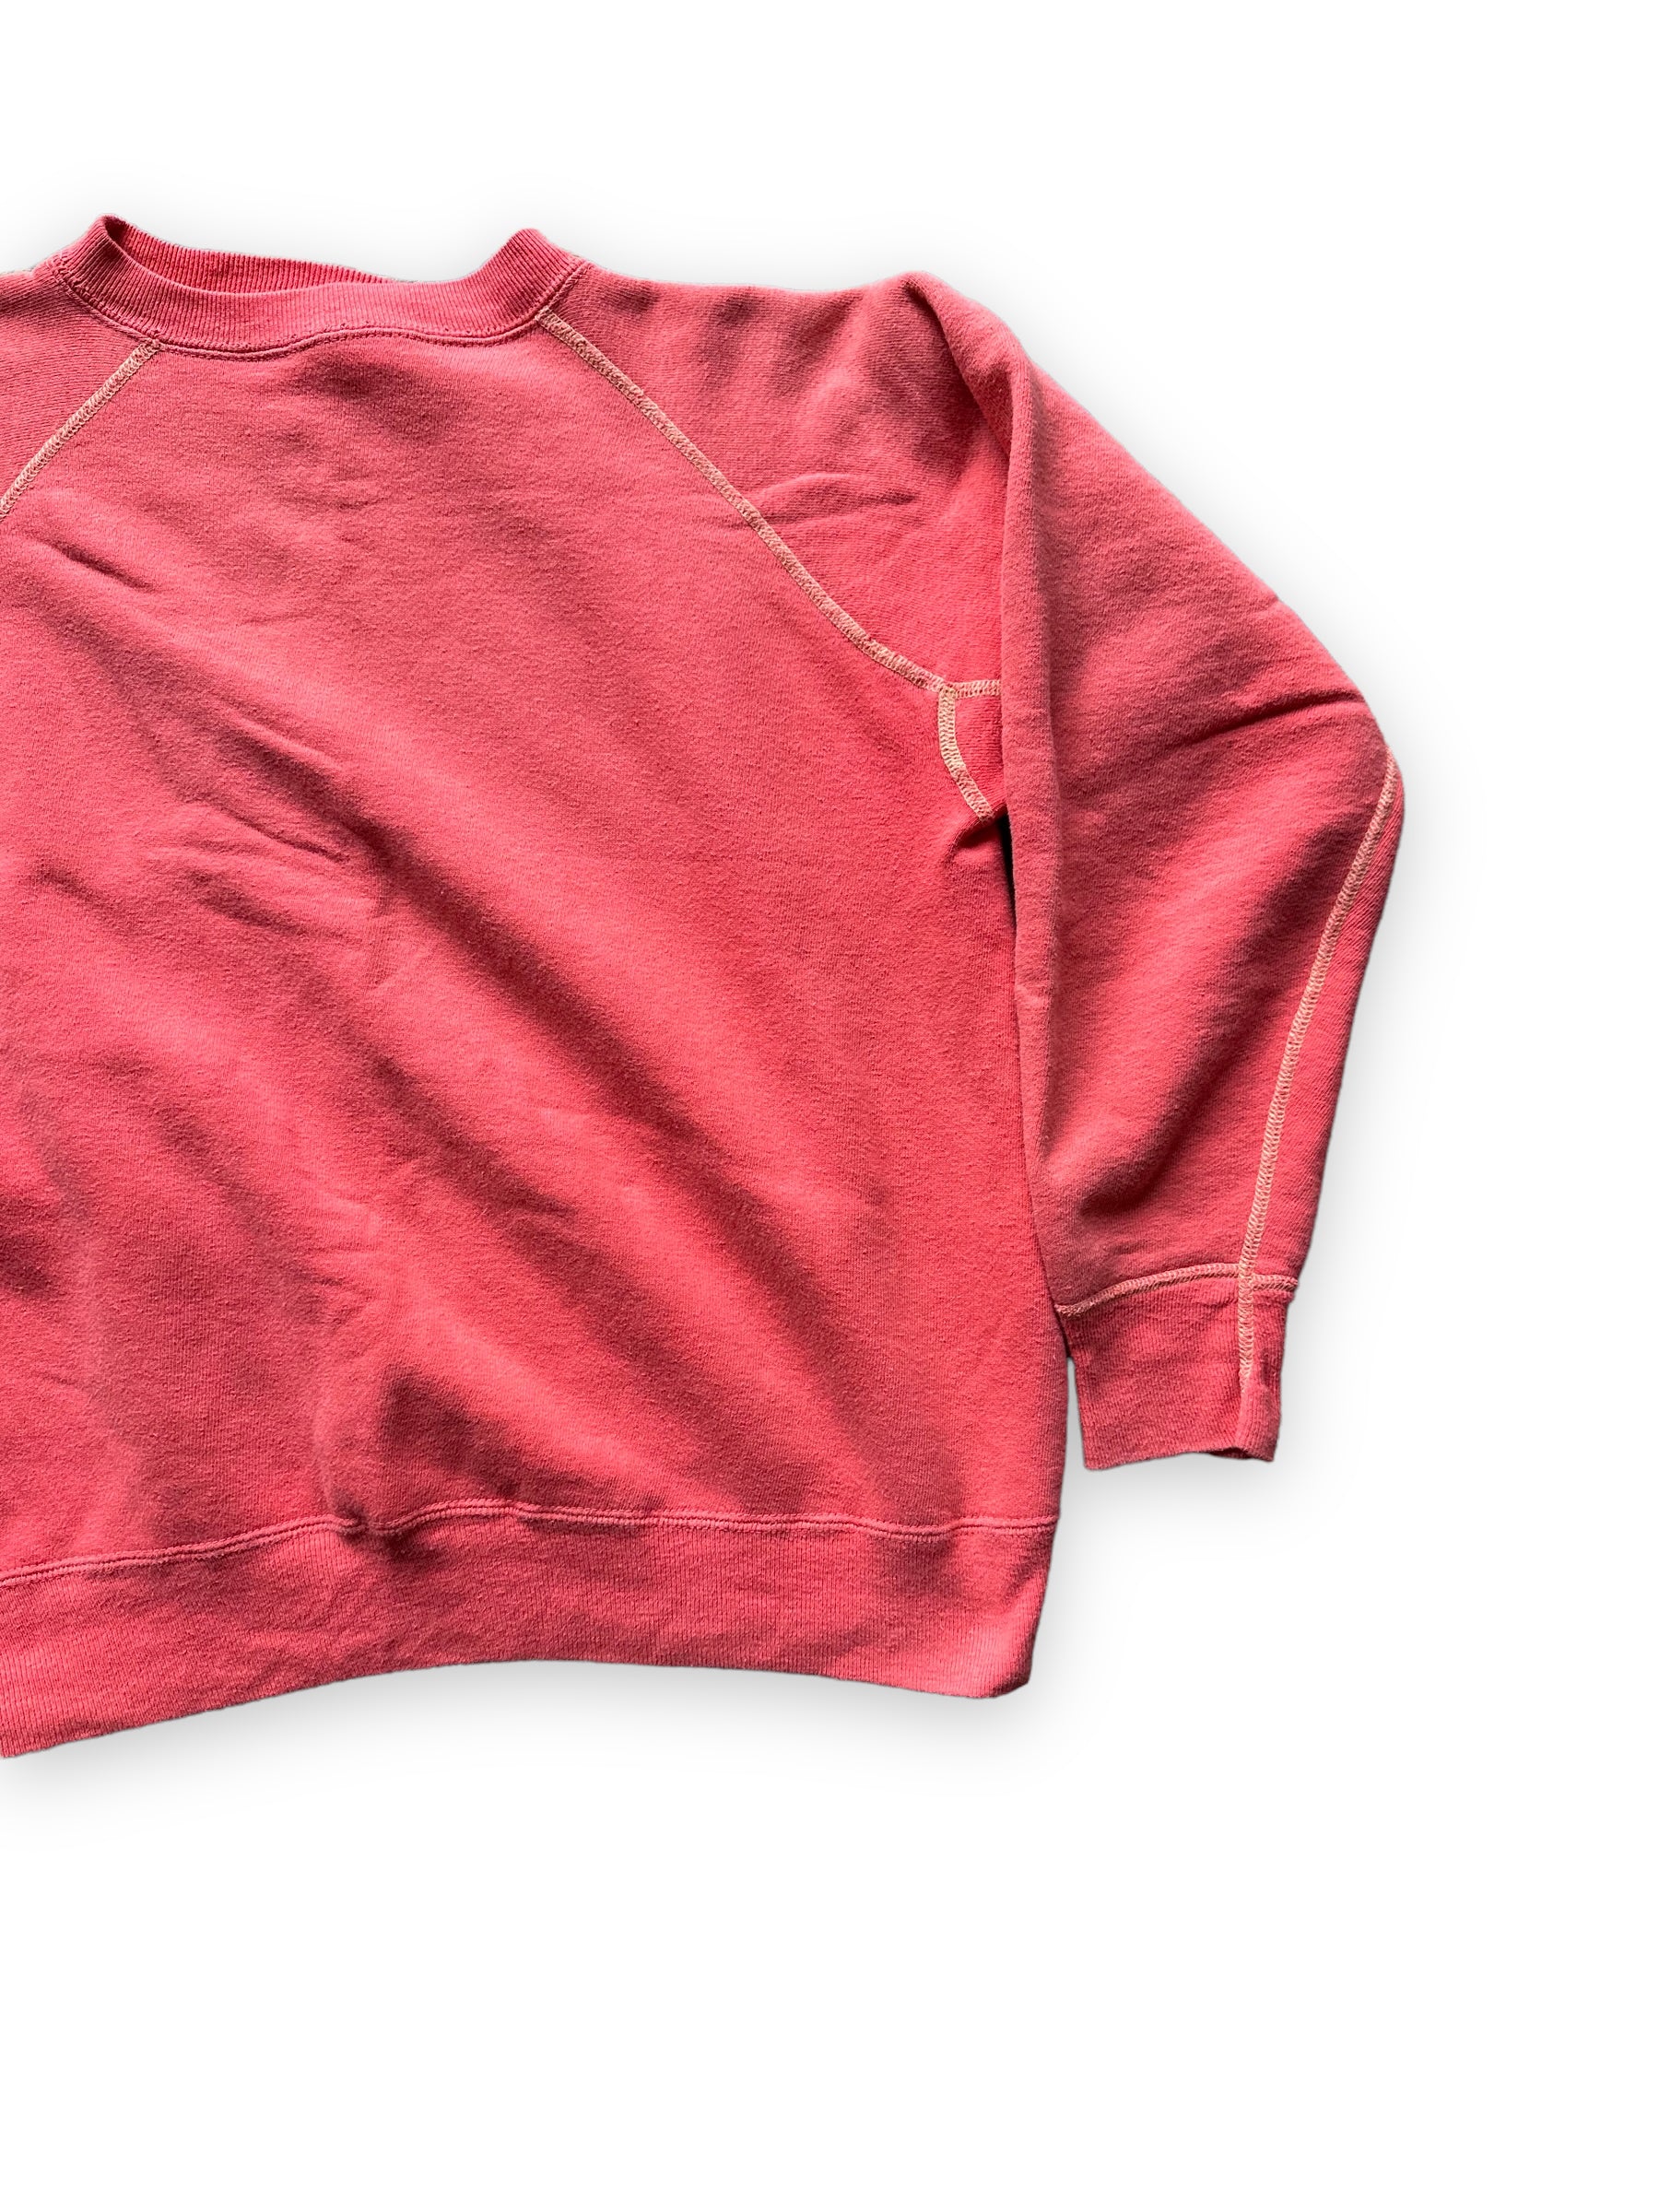 Rear Right View of Vintage Faded Red Crewneck Sweatshirt | Vintage Crewneck Sweatshirt Seattle | Barn Owl Vintage Clothing